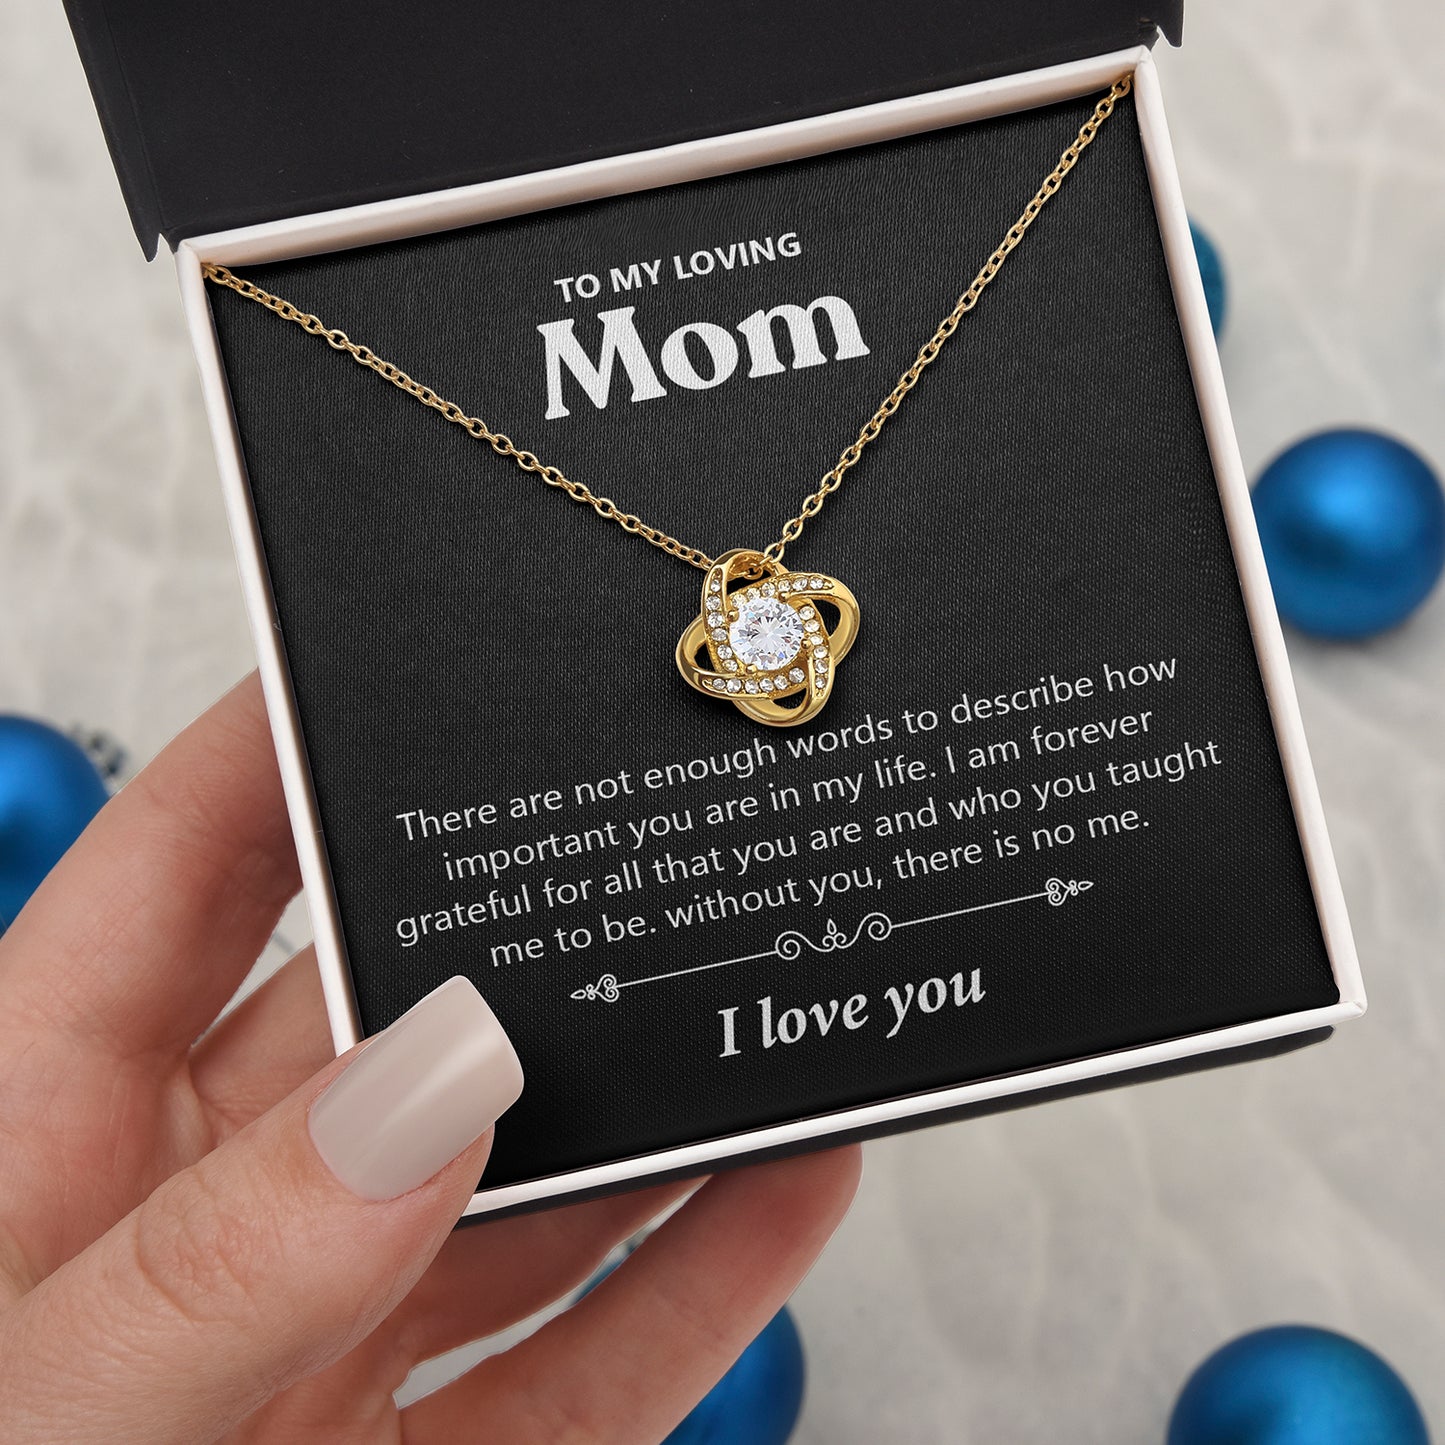 To My Loving Mom | There Are Not Enough Words | Love Knot Necklace